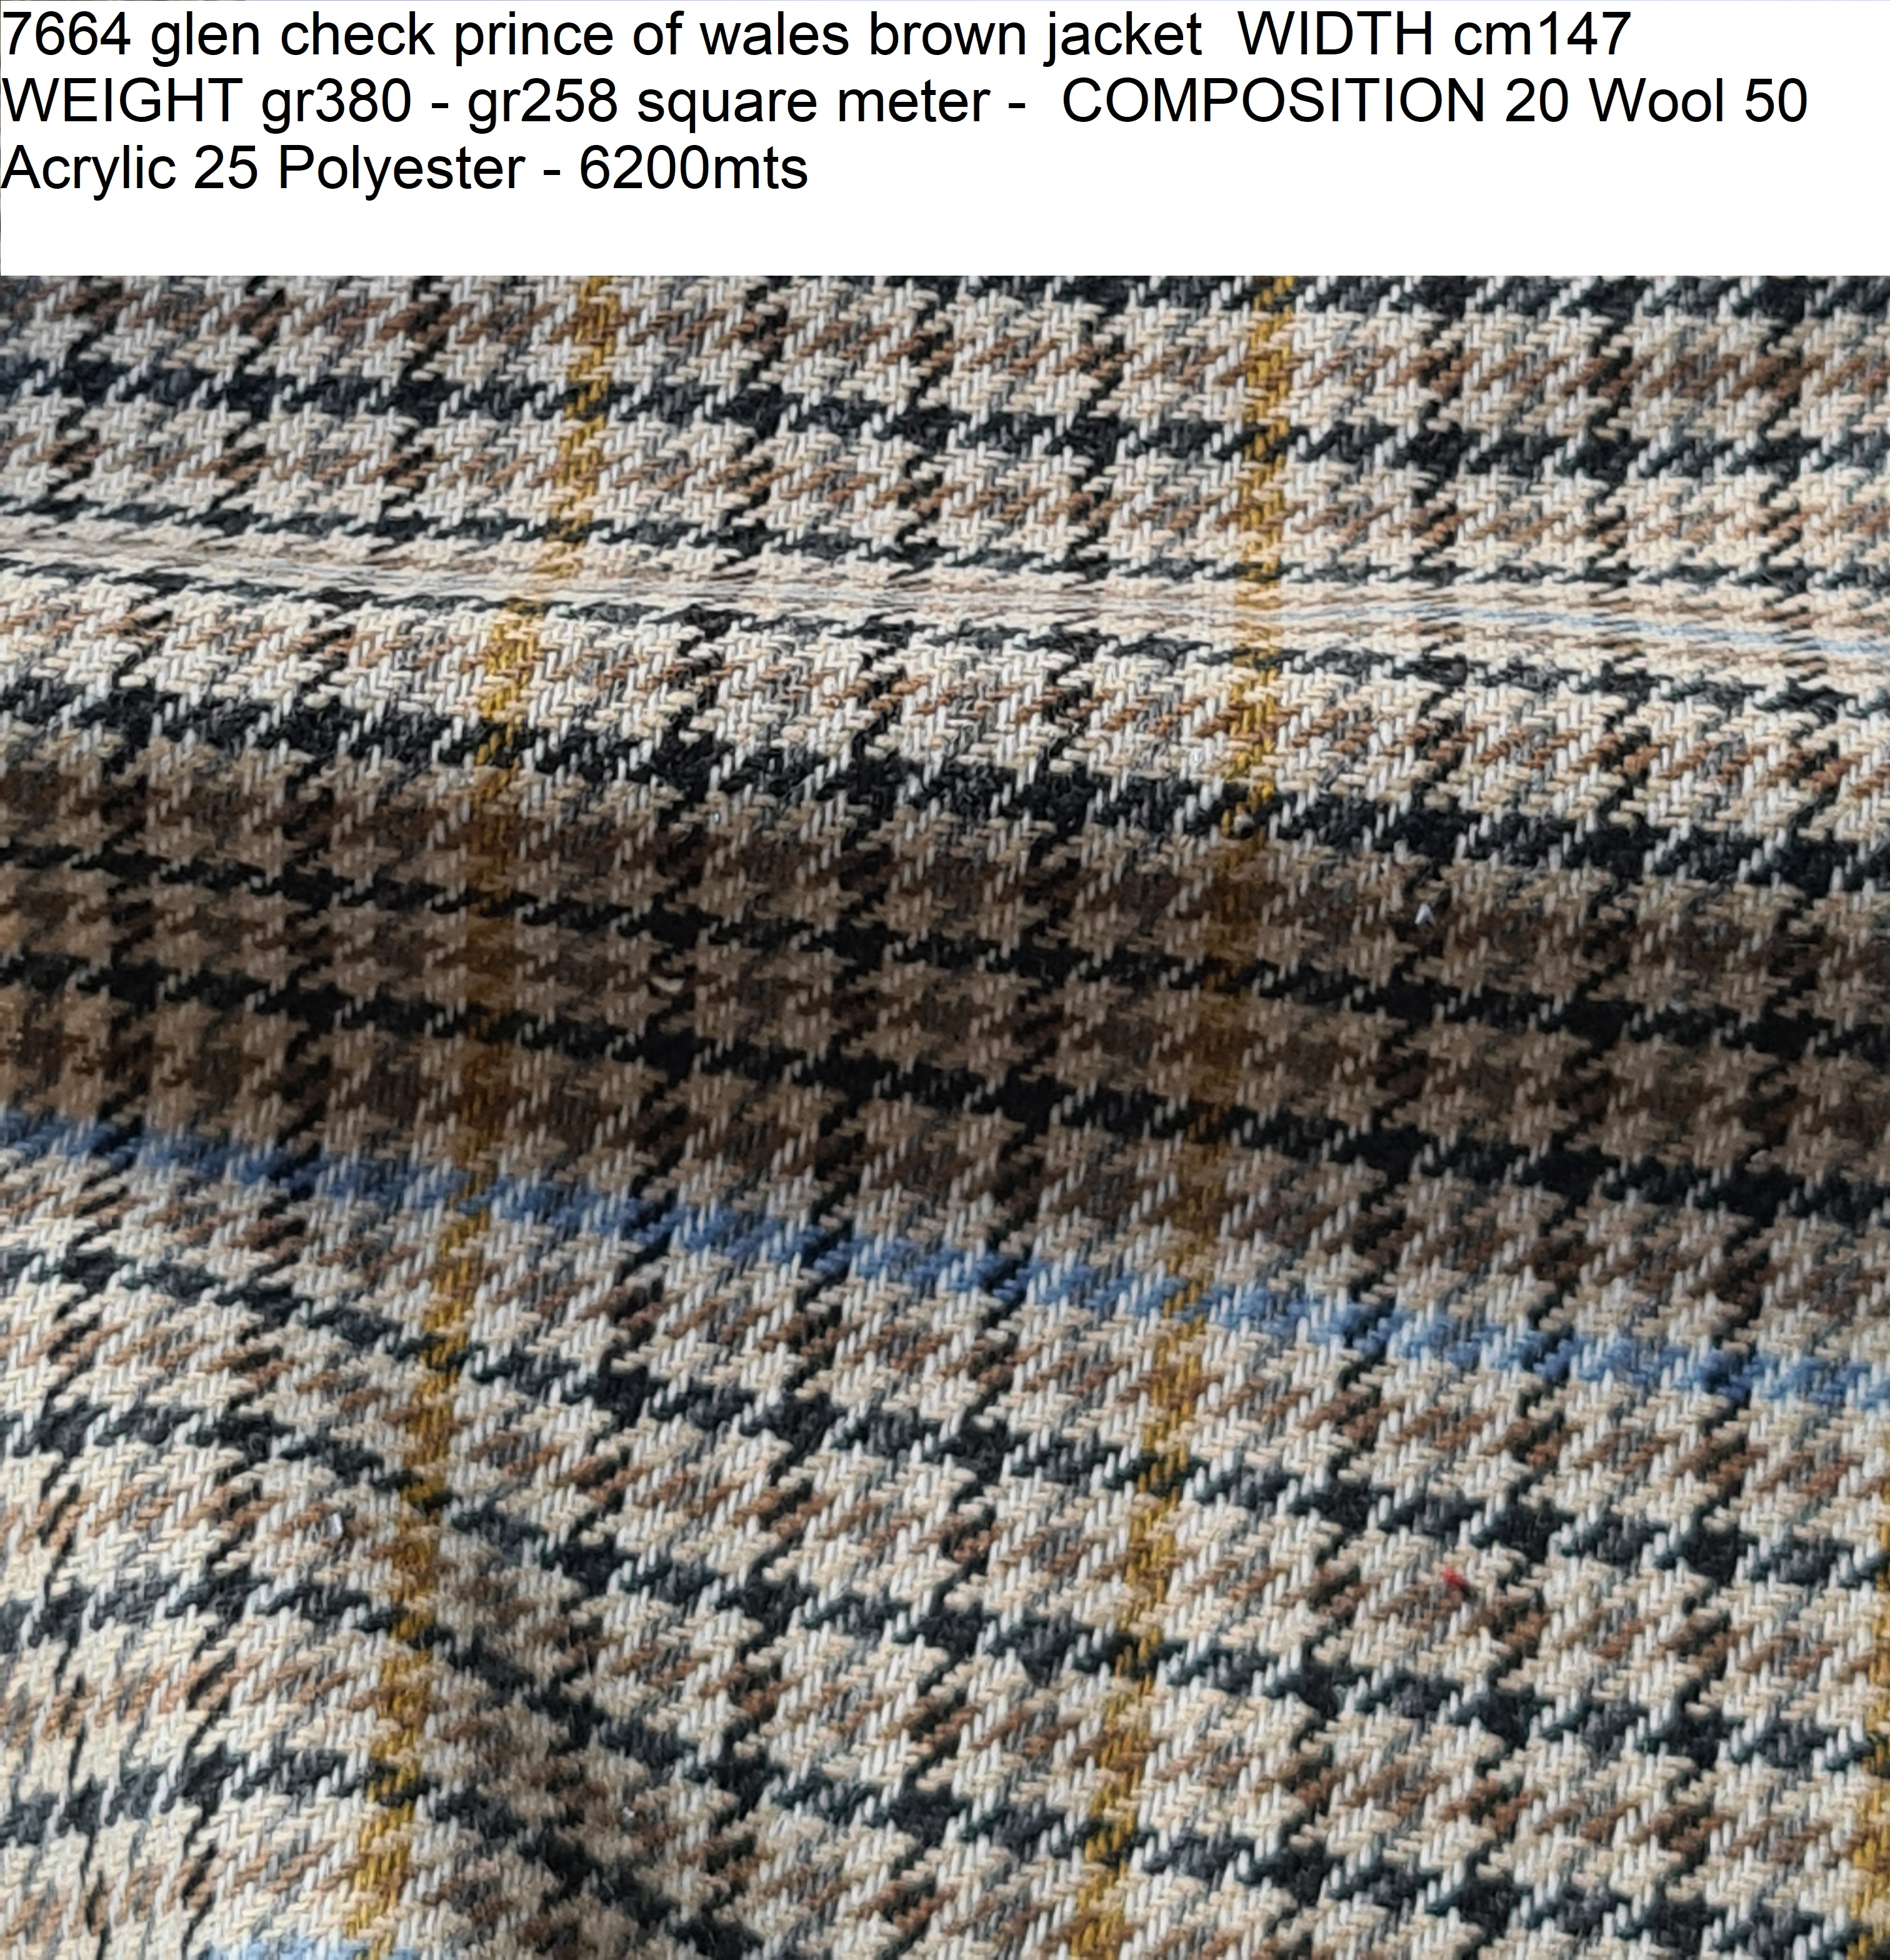 7664 glen check prince of wales brown jacket WIDTH cm147 WEIGHT gr380 - gr258 square meter - COMPOSITION 20 Wool 50 Acrylic 25 Polyester - 6200mts